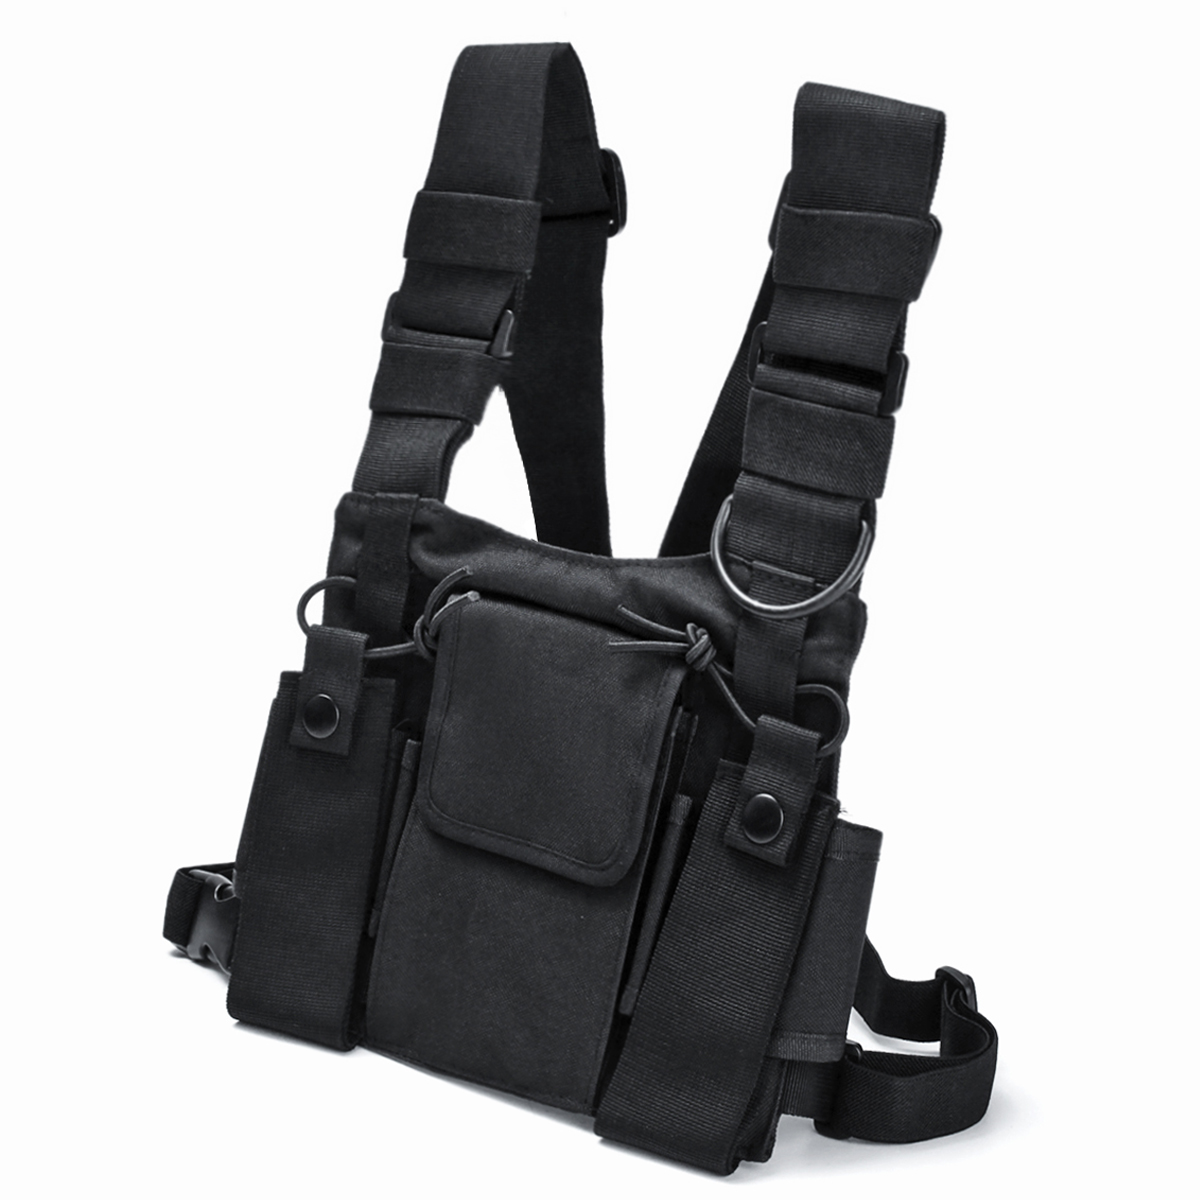 Chest-3-Pocket-Harness-Nylon-Bag-Pack-Backpack-Holster-for-Radio-Walkie-Talkie-Two-Way-Radio-1350160-1